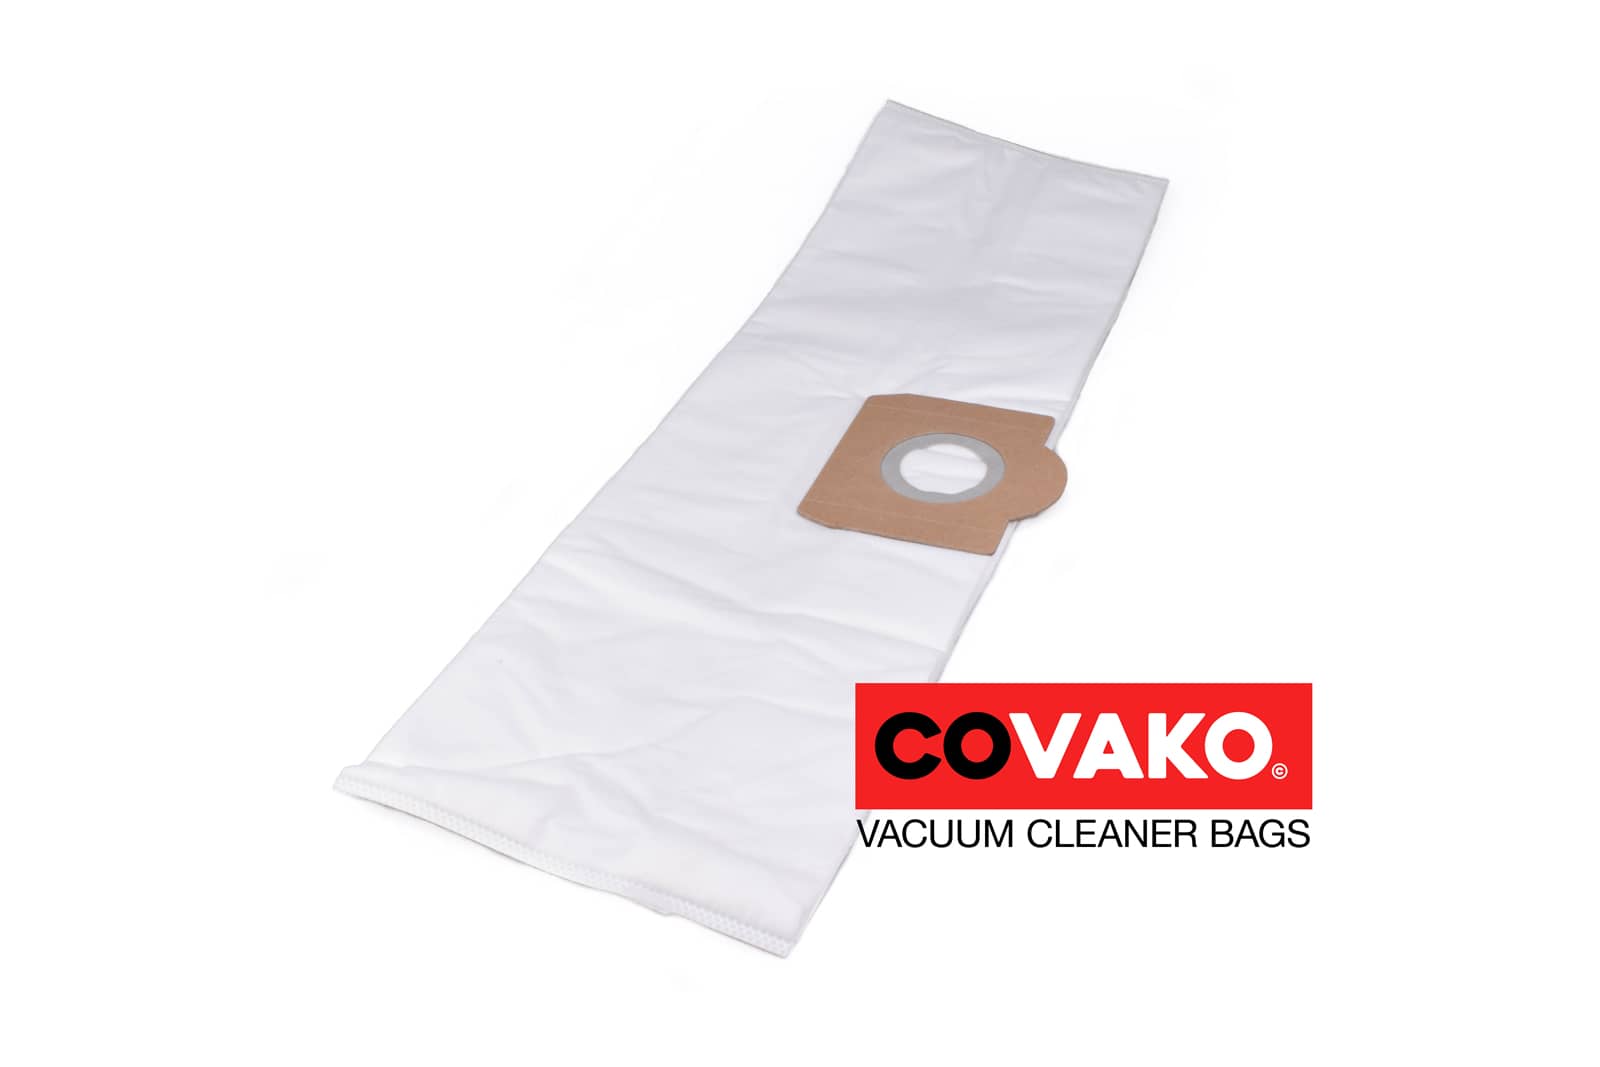 Gansow LP 1/16 ECO B / Synthesis - Gansow vacuum cleaner bags